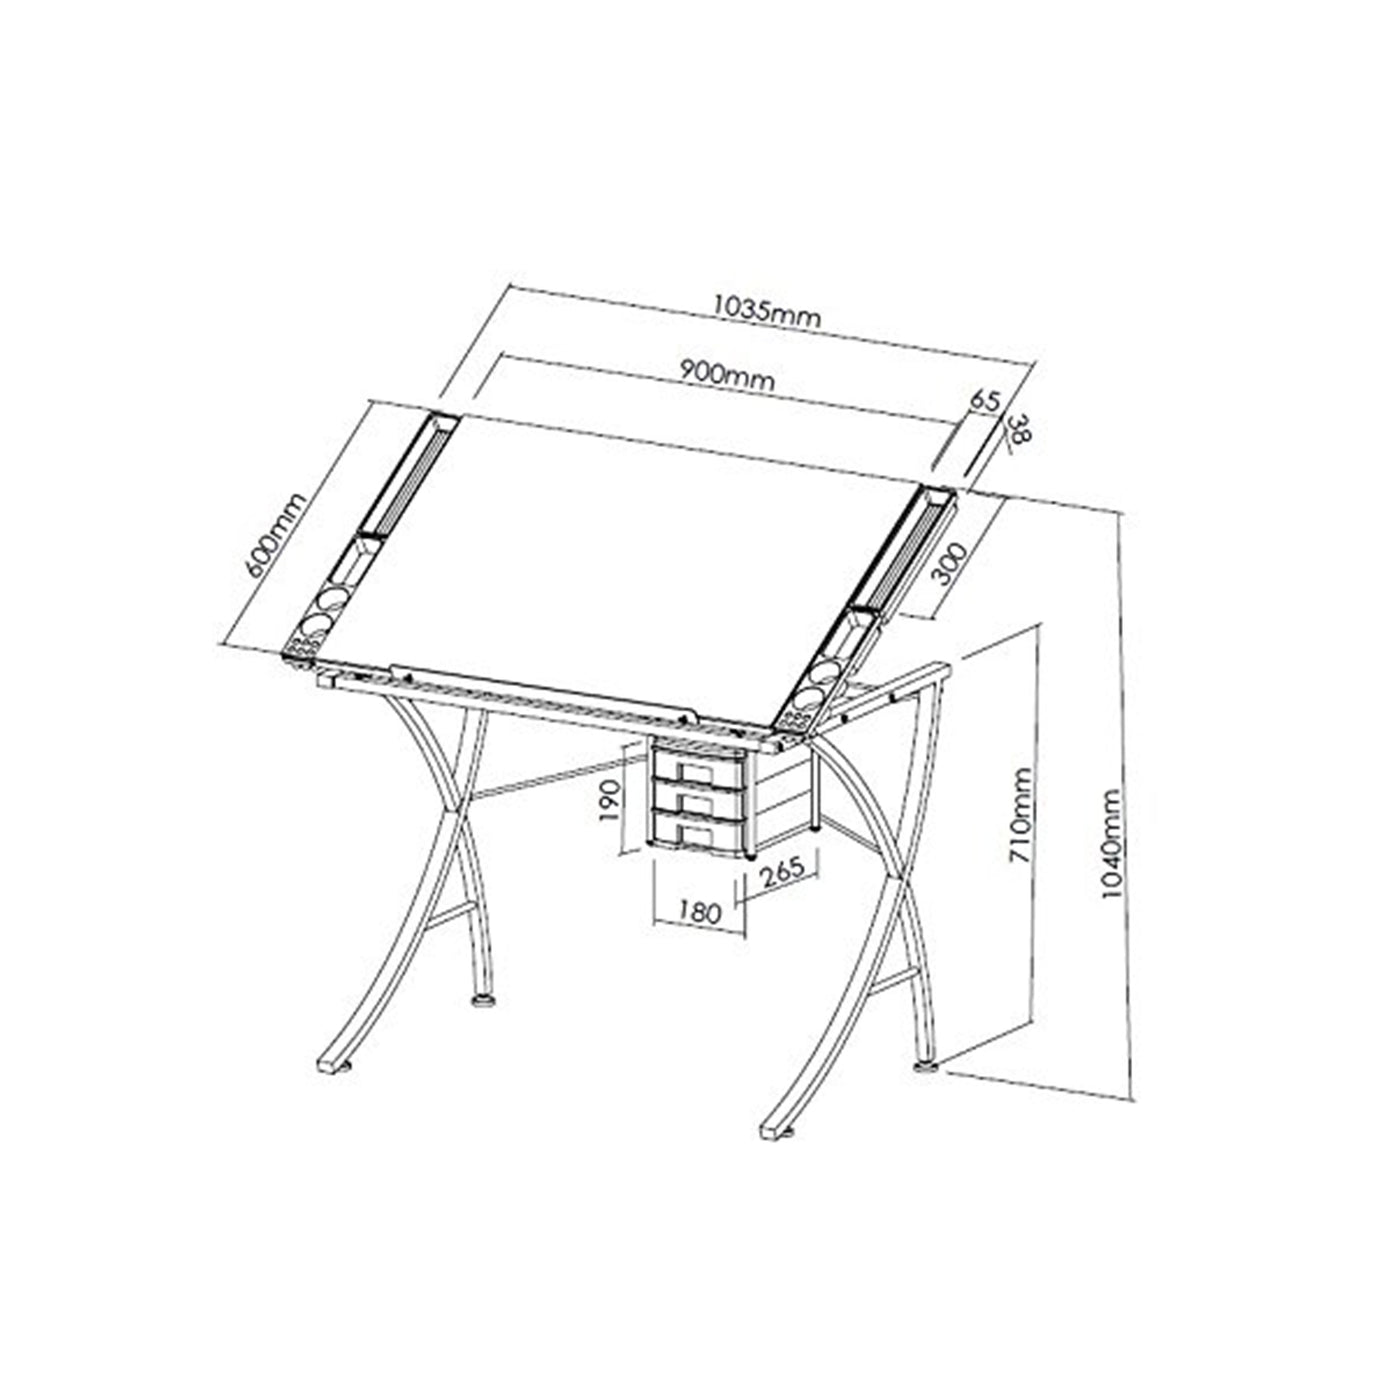 Office Drafting Table Art Drawing Adjustable Craft Work Station